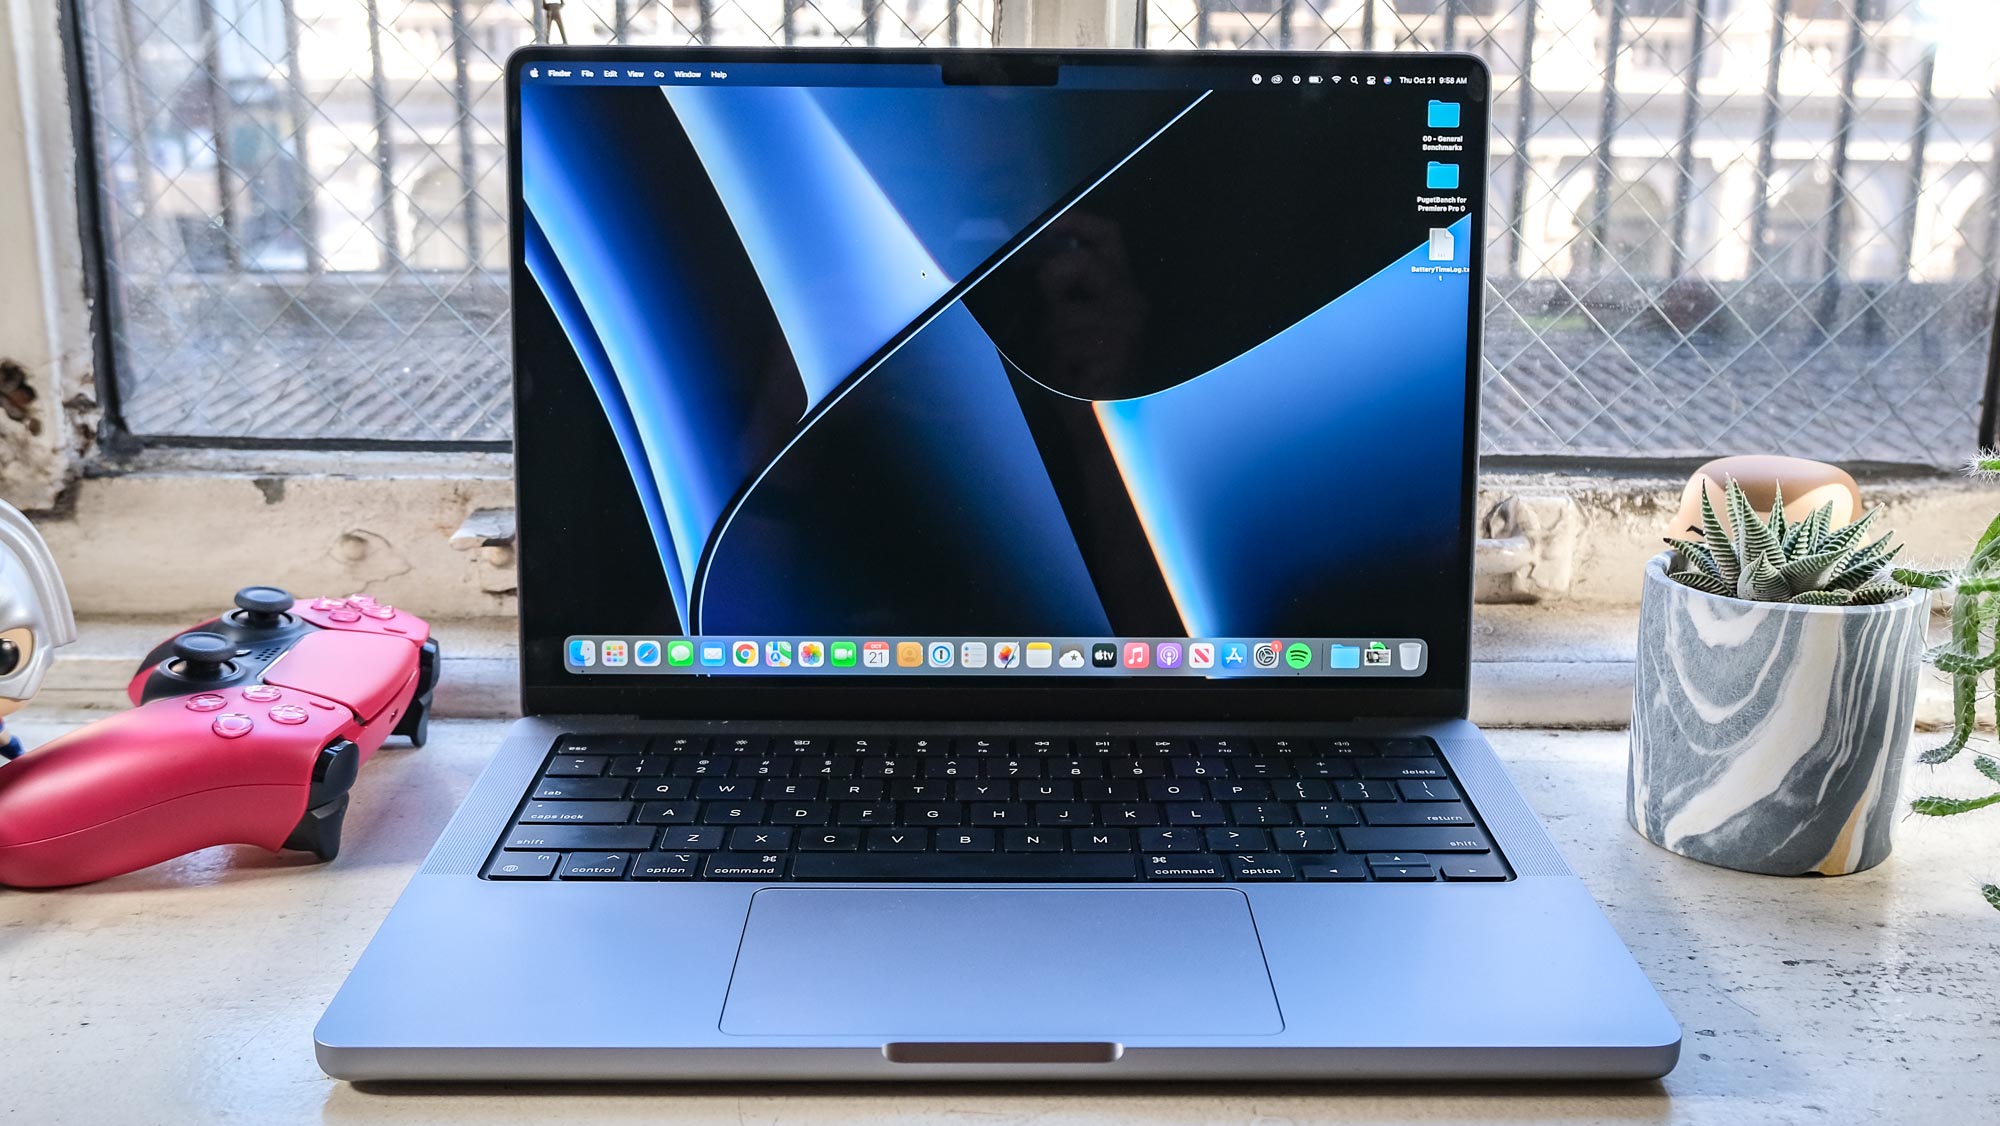 The MacBook Pro 2021 (14-inch) open to the desktop with a metallic blue background